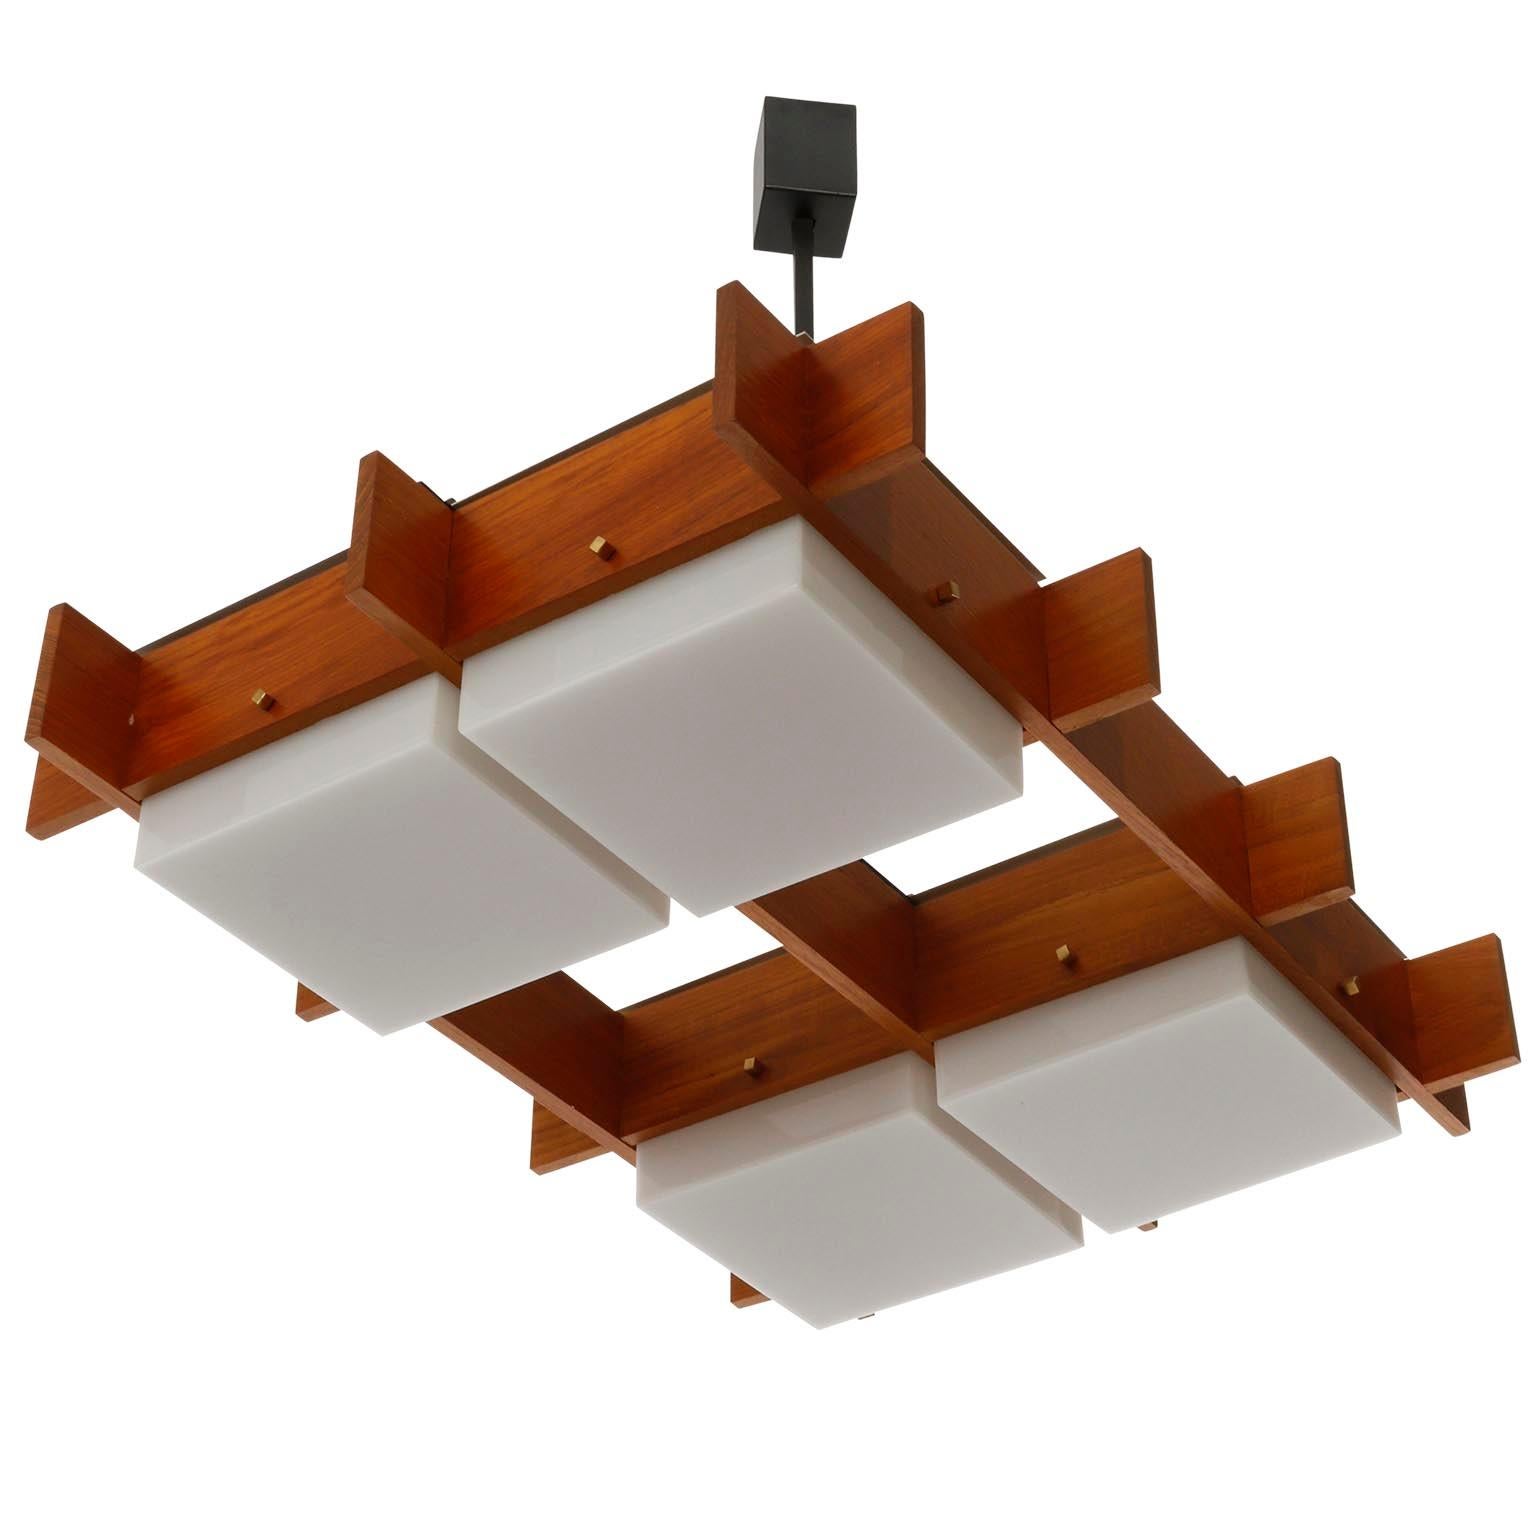 An Italian ceiling light fixture manufactured by Esperia in midcentury, circa 1960 (late 1950s or early 1960s).
The lamp is made of a warm and rich toned solid teak frame, opaline Lucite lamp shades, brass bolts and blackend iron.
The fixture has